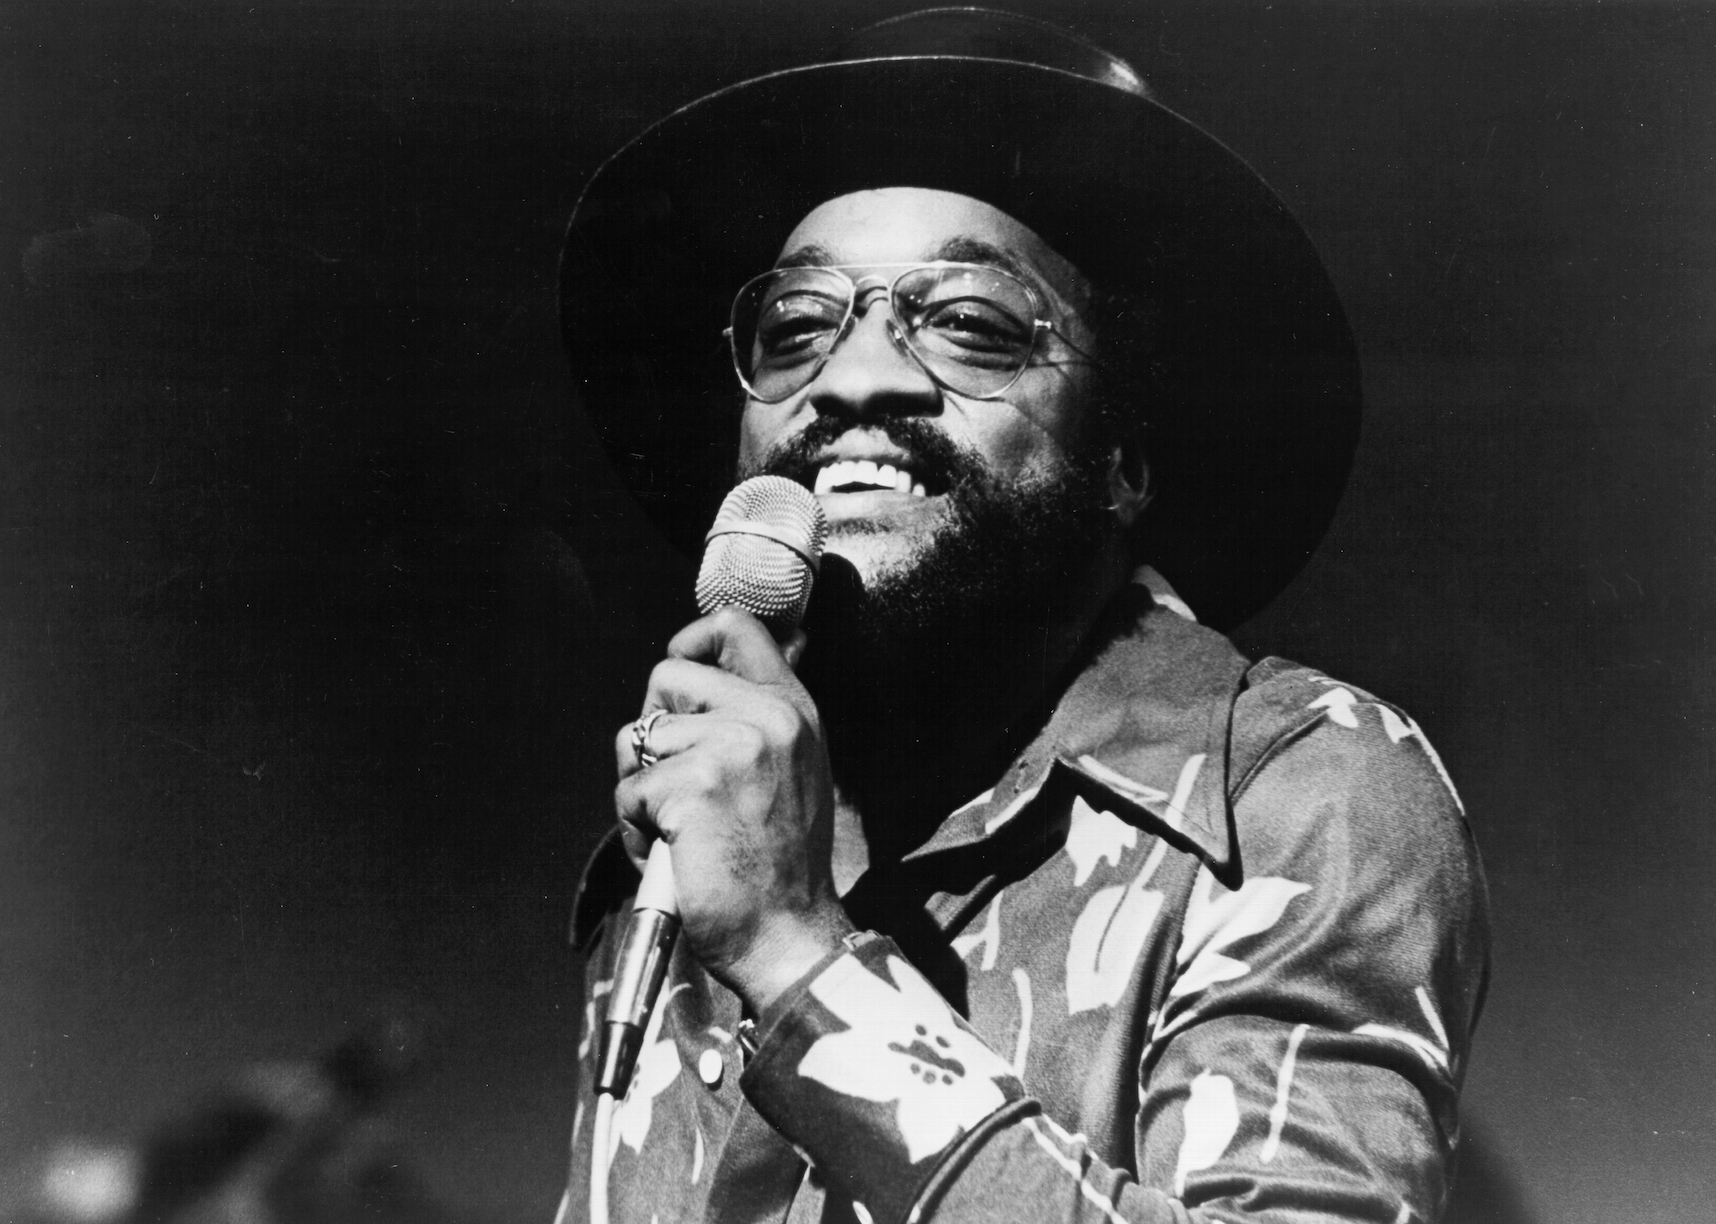 Photo of Billy Paul with microphone smiling.